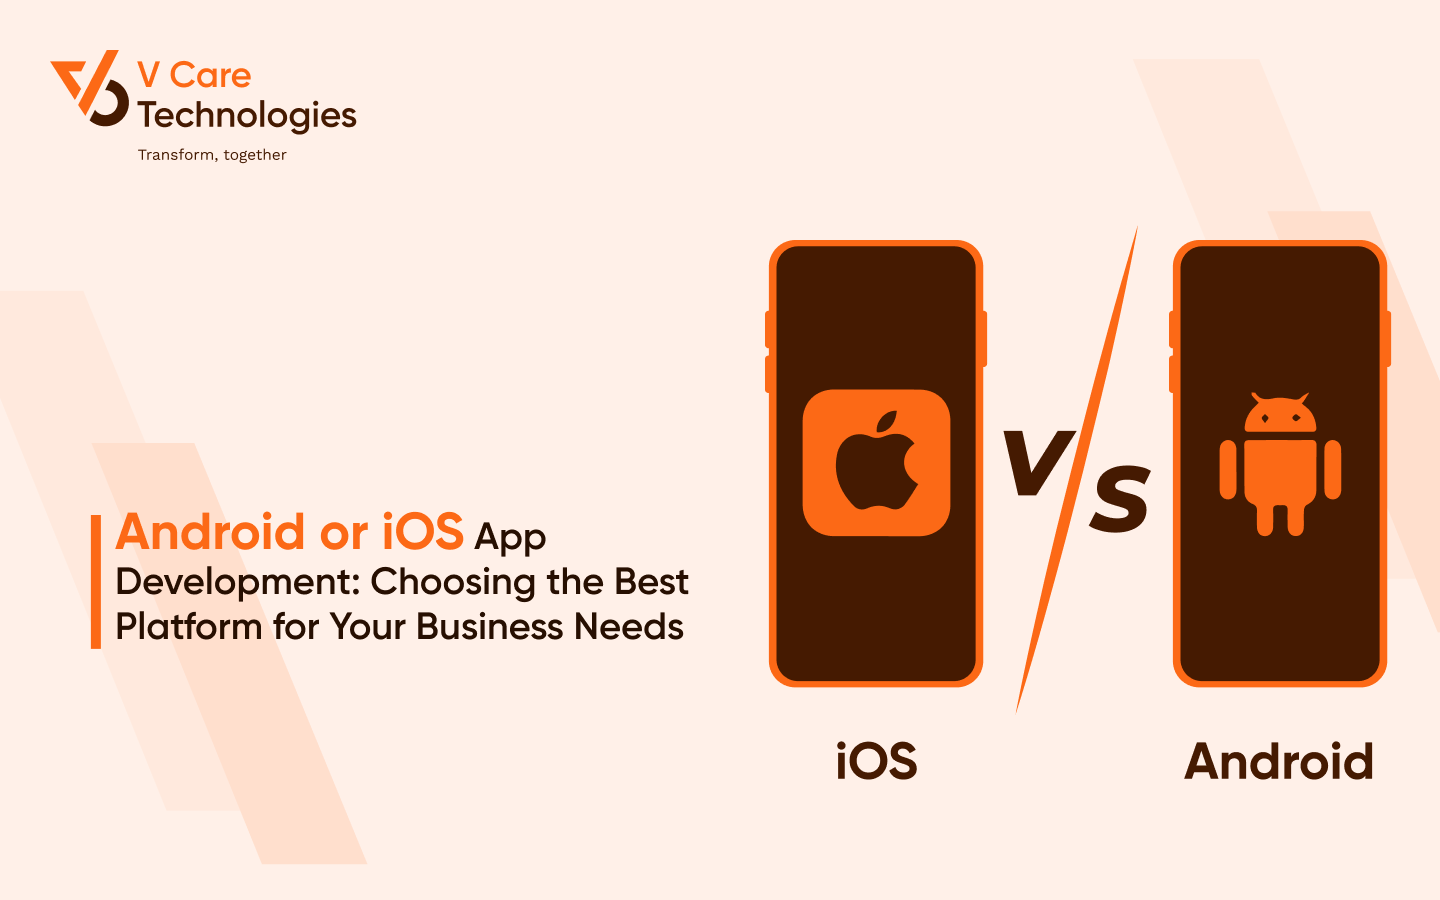 iOS vs. Android App Development: Choosing the Best Platform for Your Business Needs